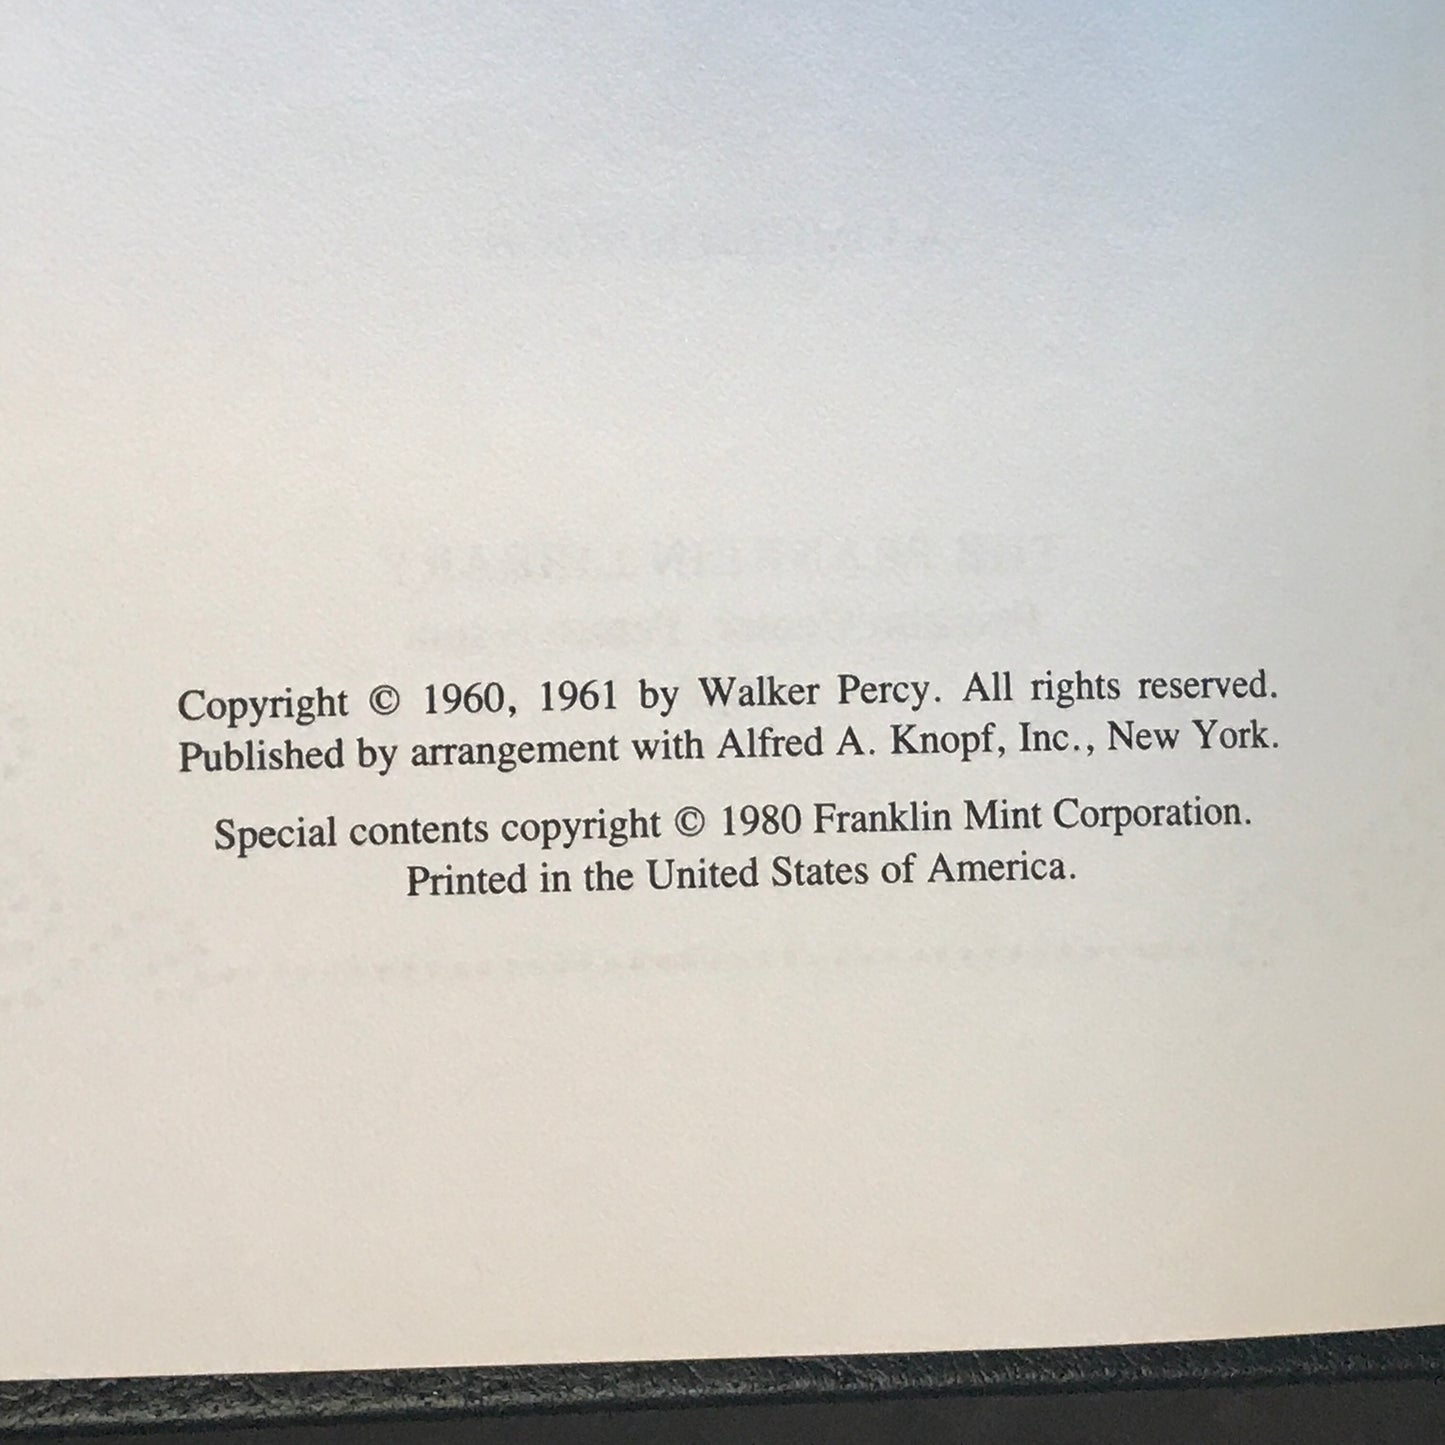 The Moviegoer - Walker Percy - Signed - Franklin Library - 1980